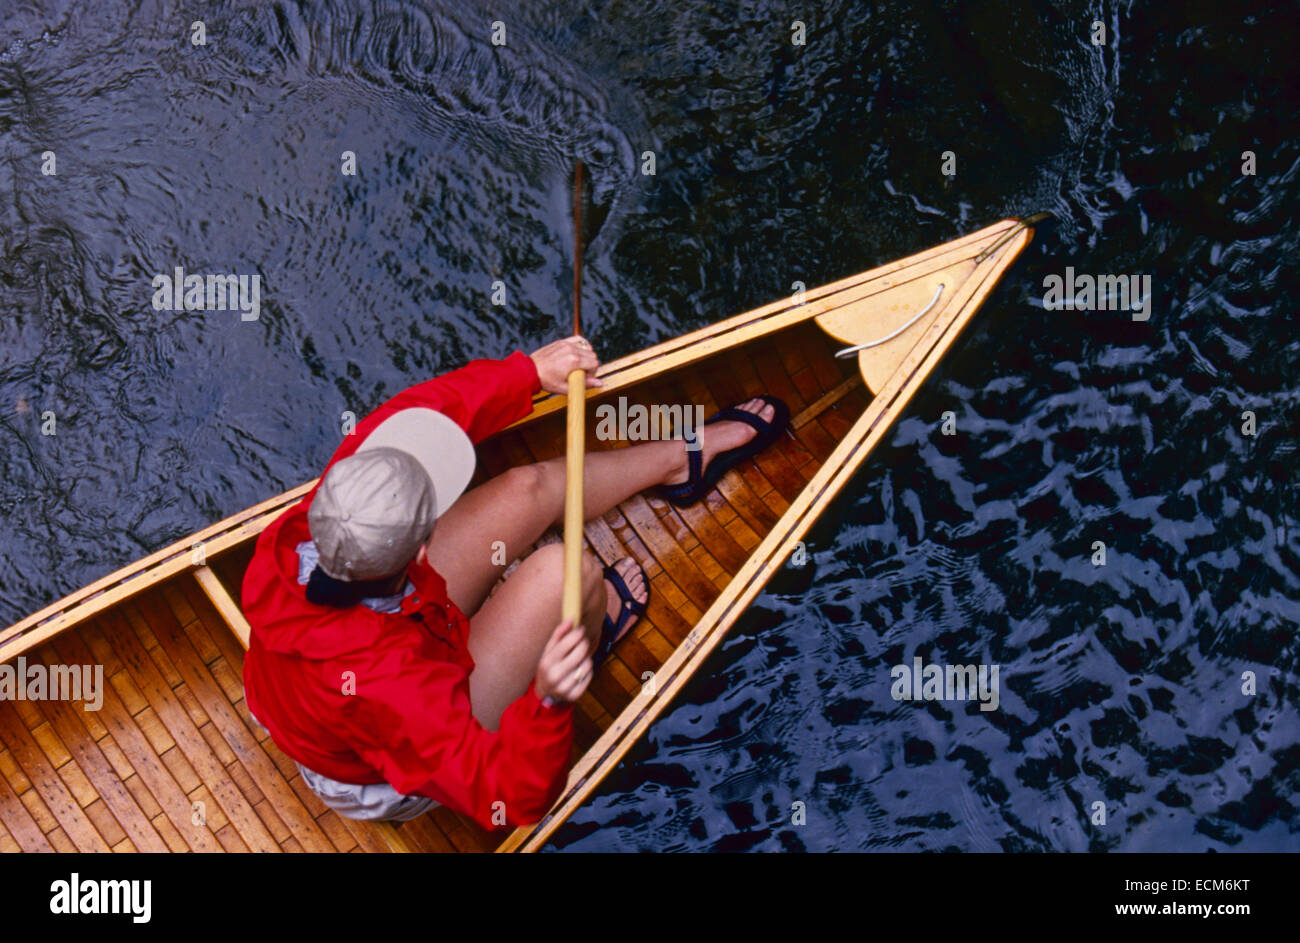 A young woman in a bright red jacket paddles a vintage wooden canoe in a stream Stock Photo